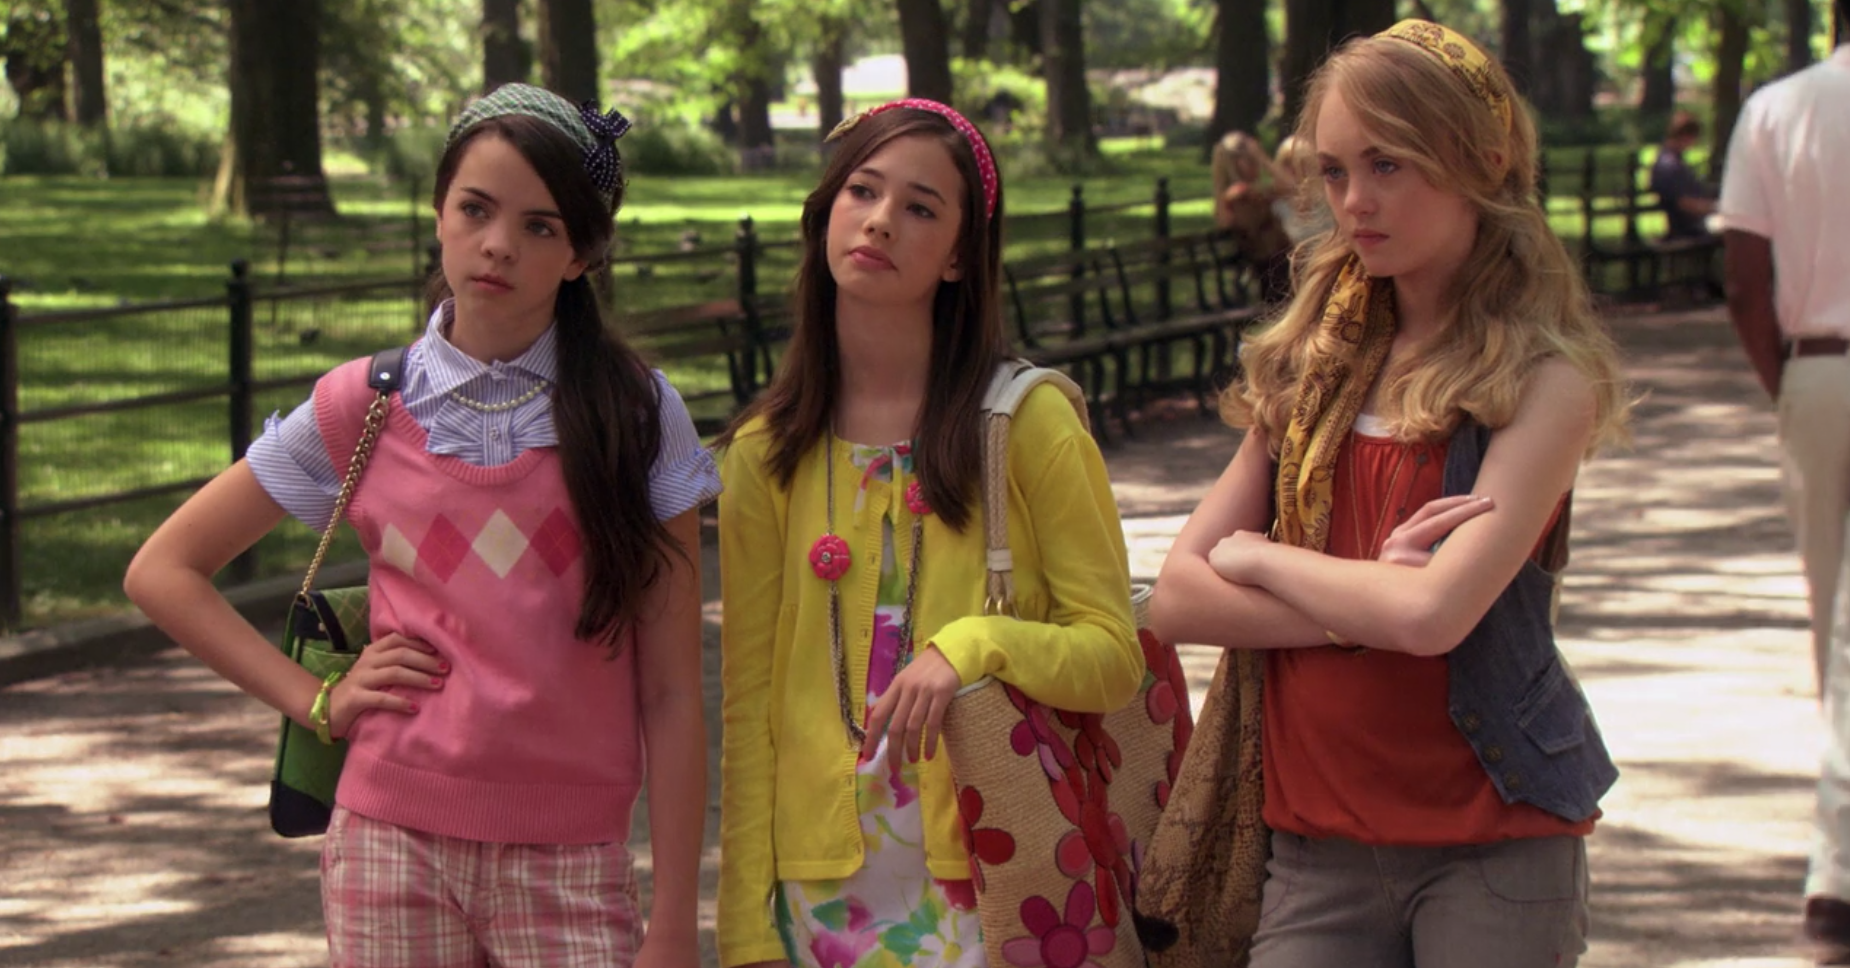 Mini-Blair and Mini-Serena on Gossip Girl — Where Are They Now